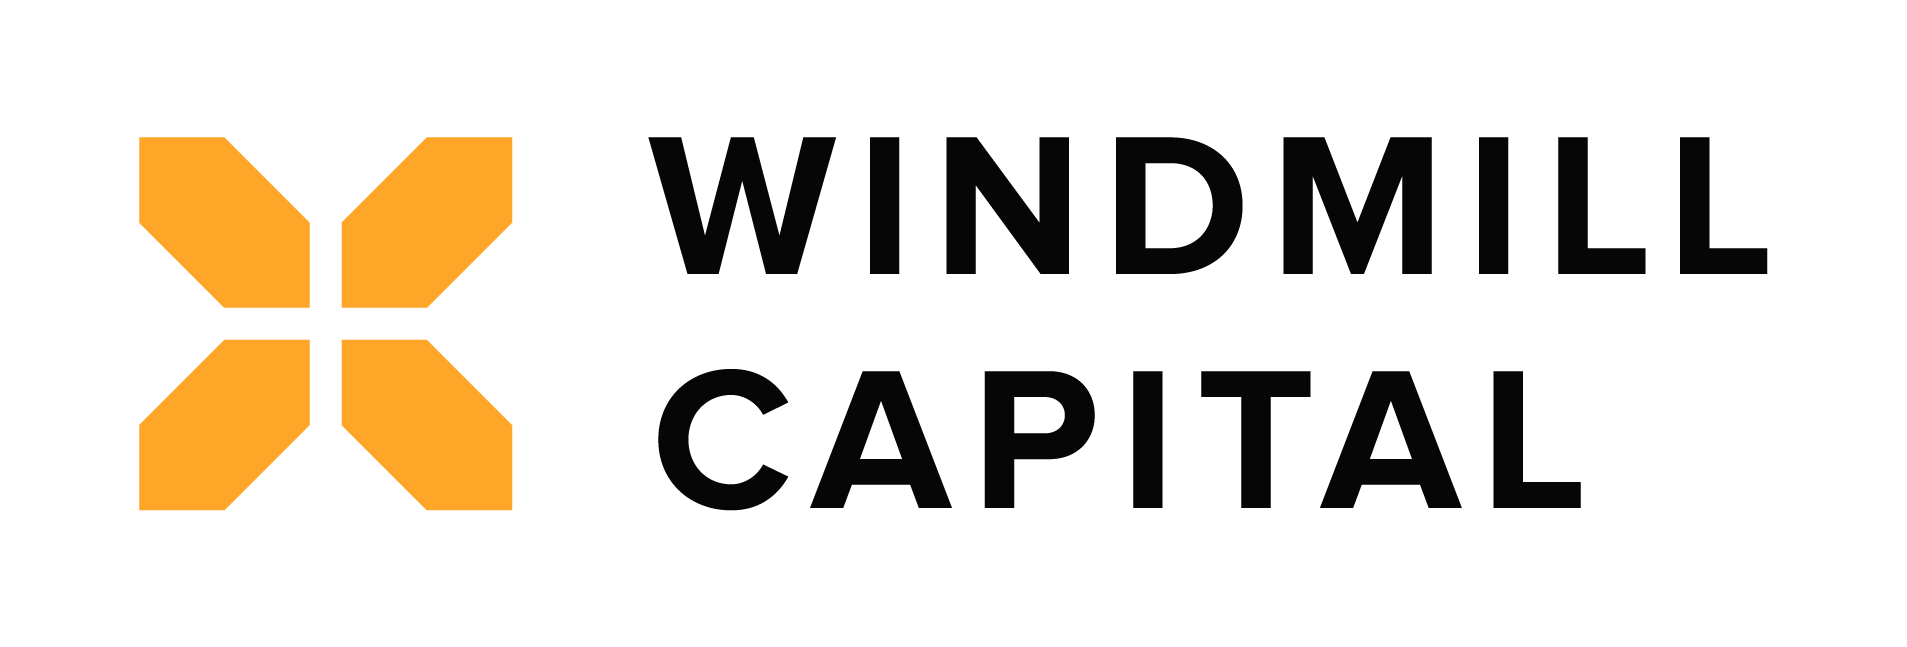 smallcases from Windmill Capital